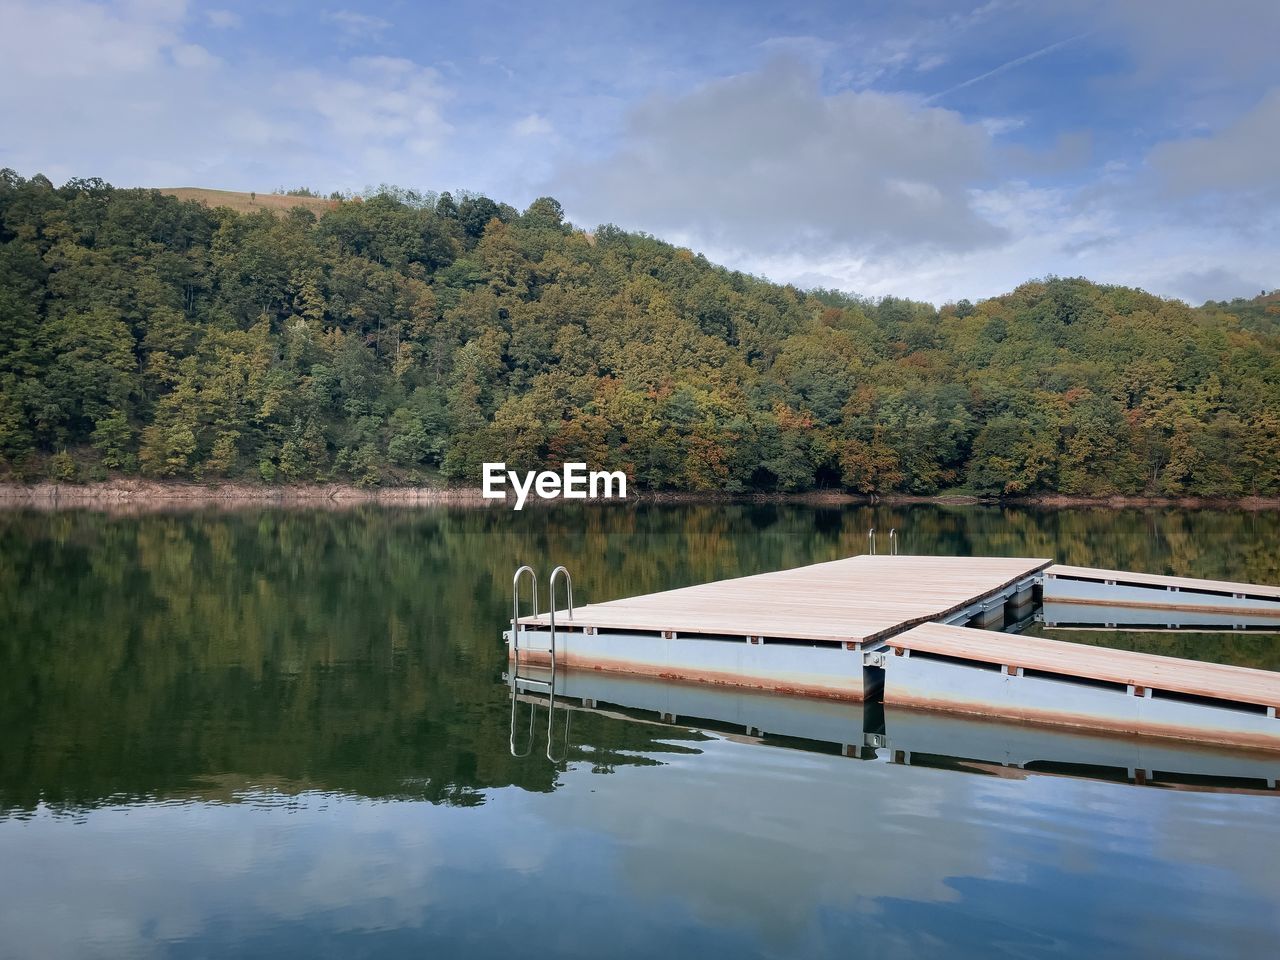 Wooden pontoon on a lake surrounded by forest beginning to change colors in autumn